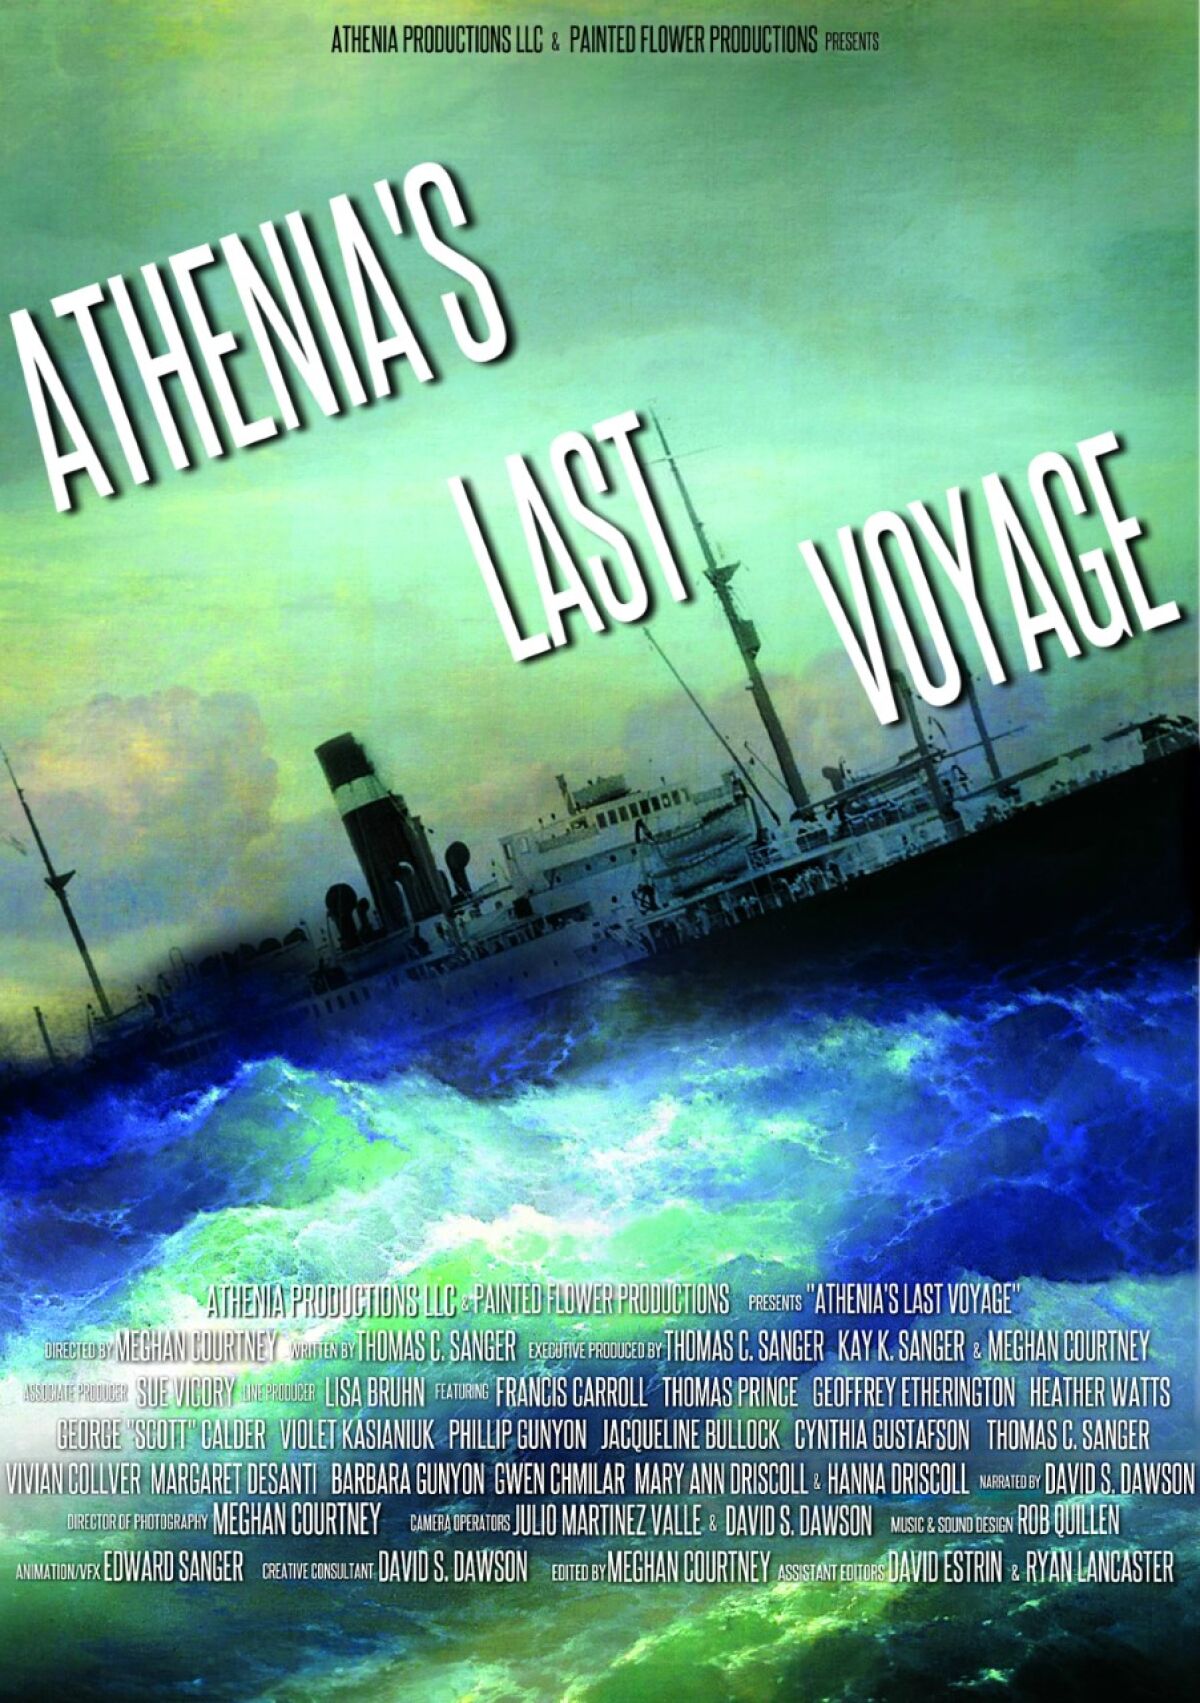 "Athenia's Last Voyage" is an in-production documentary by La Jollans Tom and Kay Sanger.